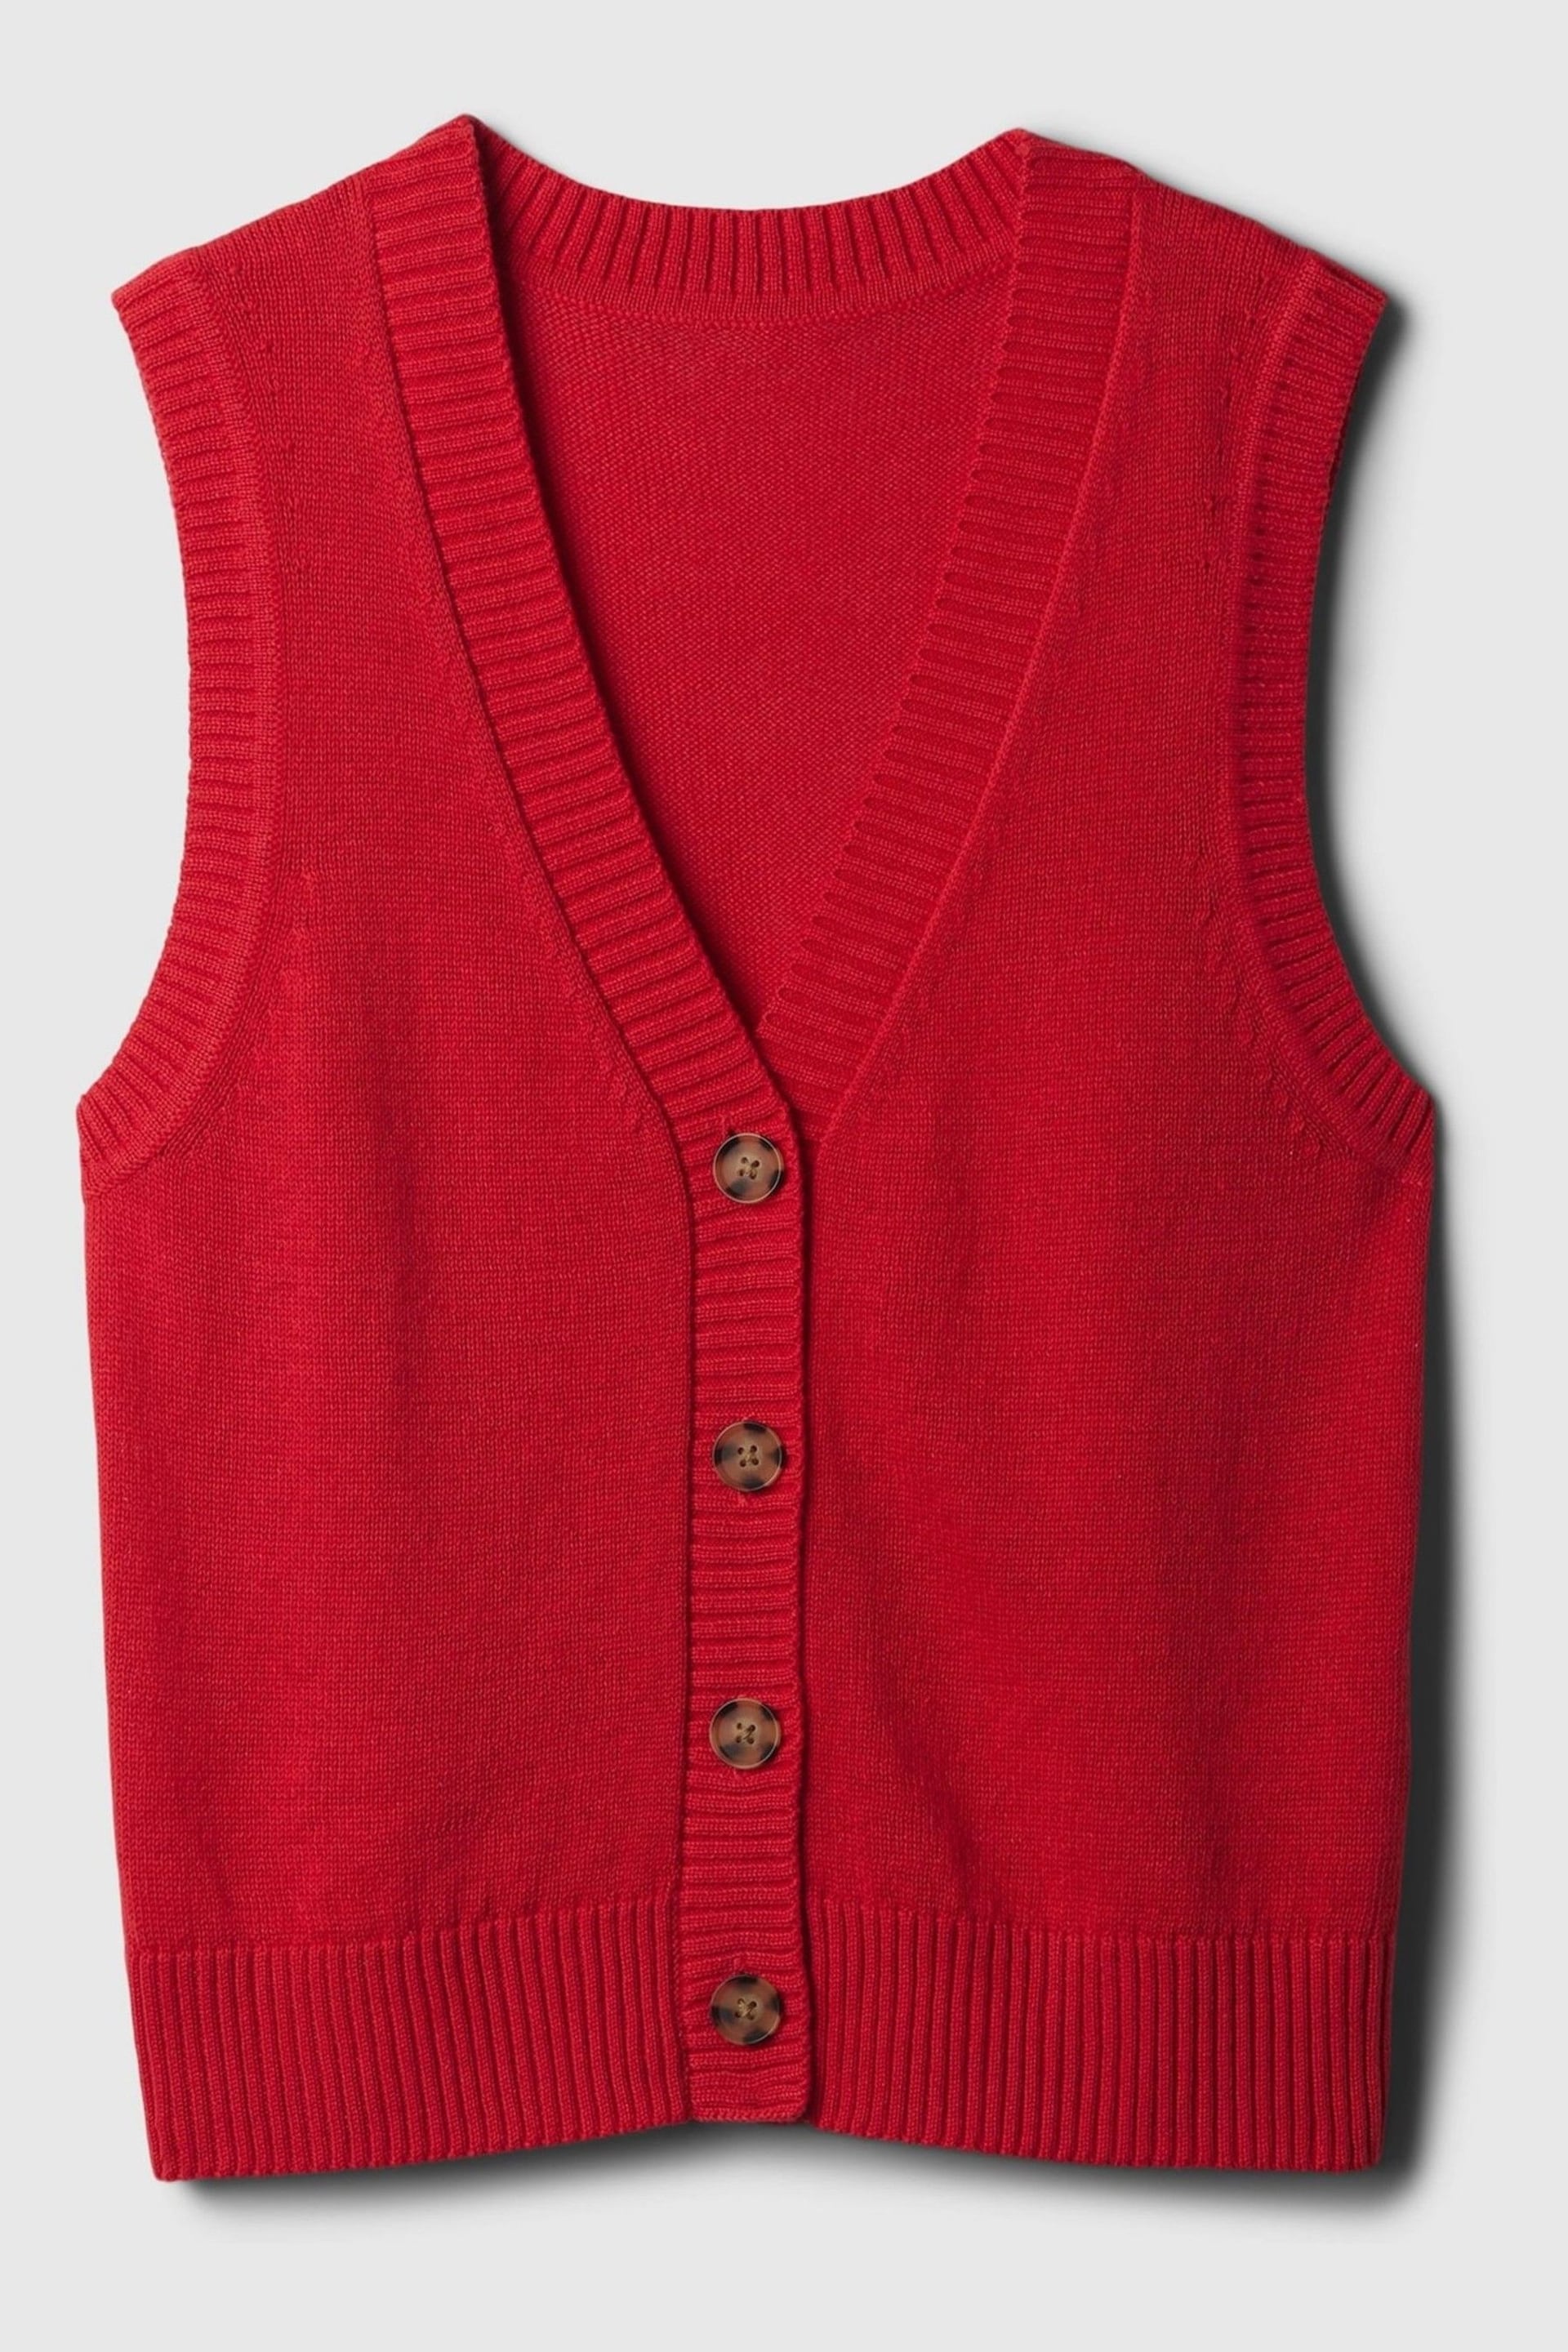 Gap Red Linen Blend Soft Knitted Waistcoat - Image 5 of 5